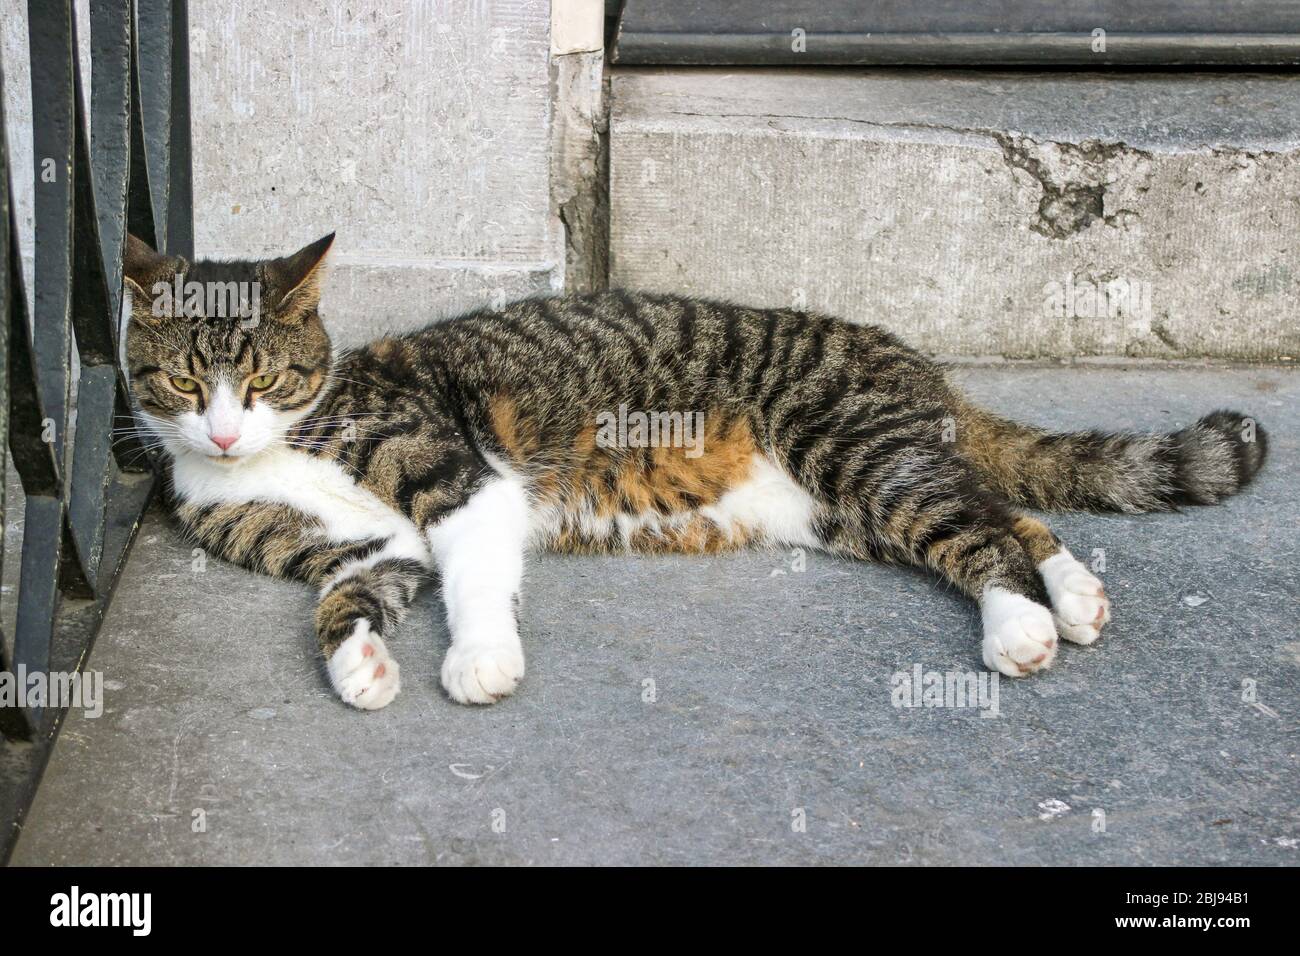 Semi-feral city cat napping on stairs in Amsterdam, Netherlands Stock Photo